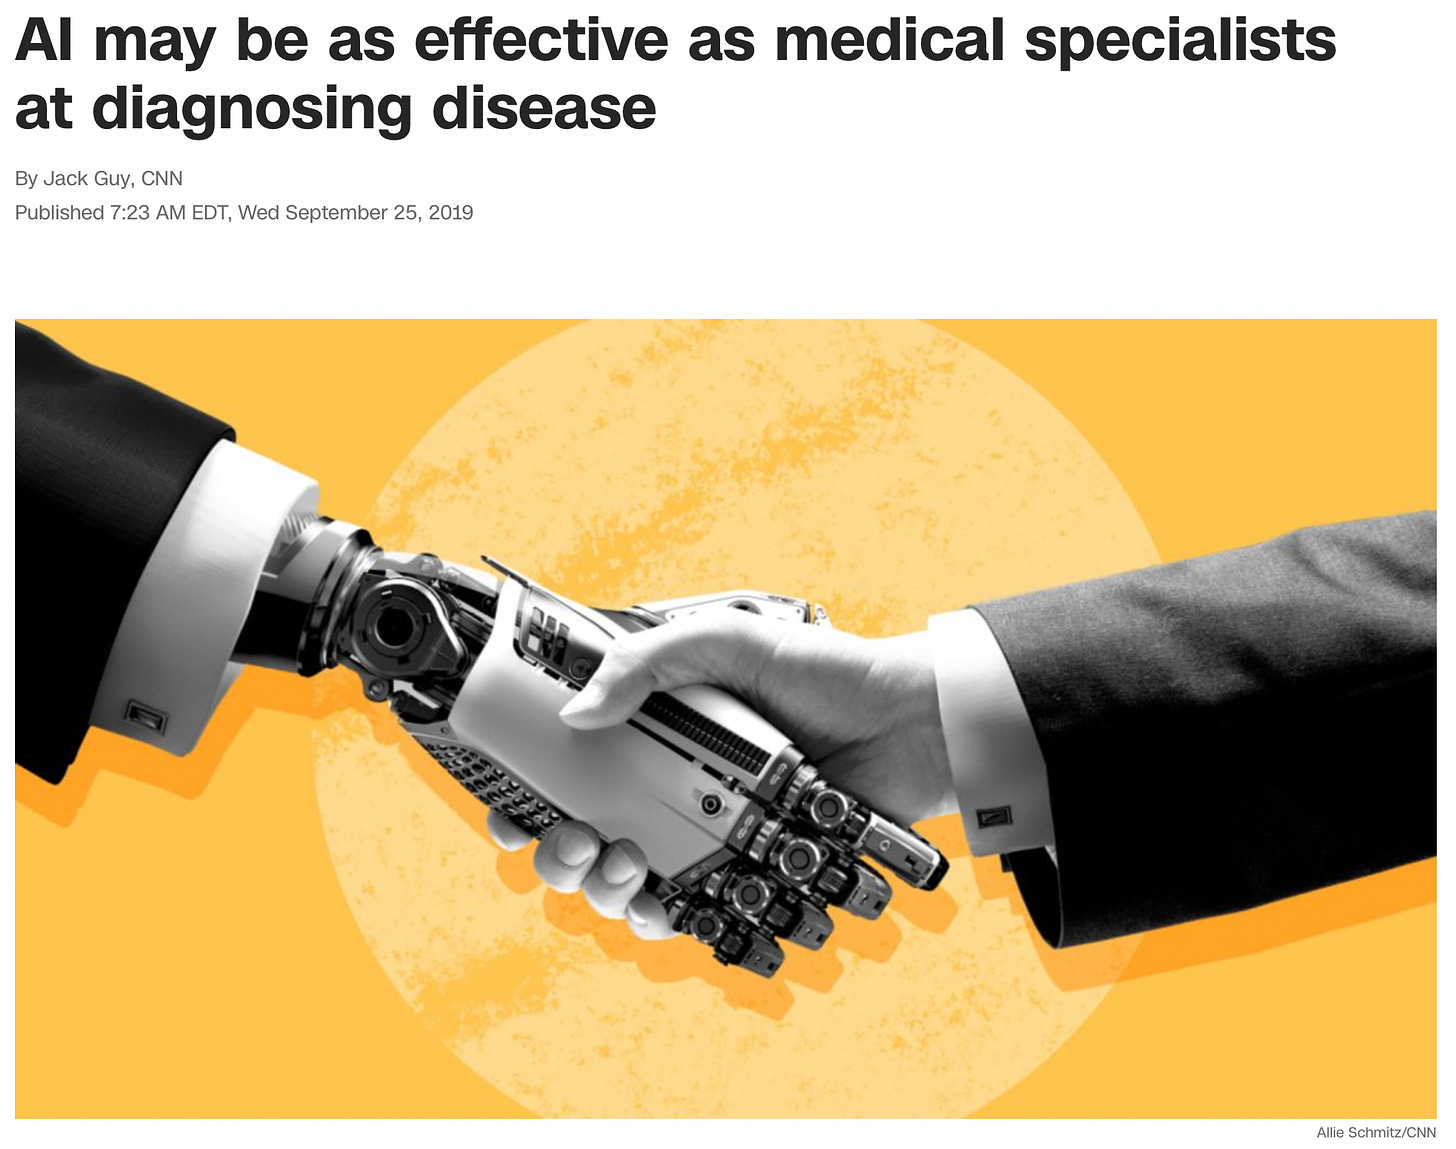 A screenshot of a CNN Health news article which says AI might be as effective as medical specialists at diagnosing disease. The cover image is a human hand shaking hands with a robot hand.